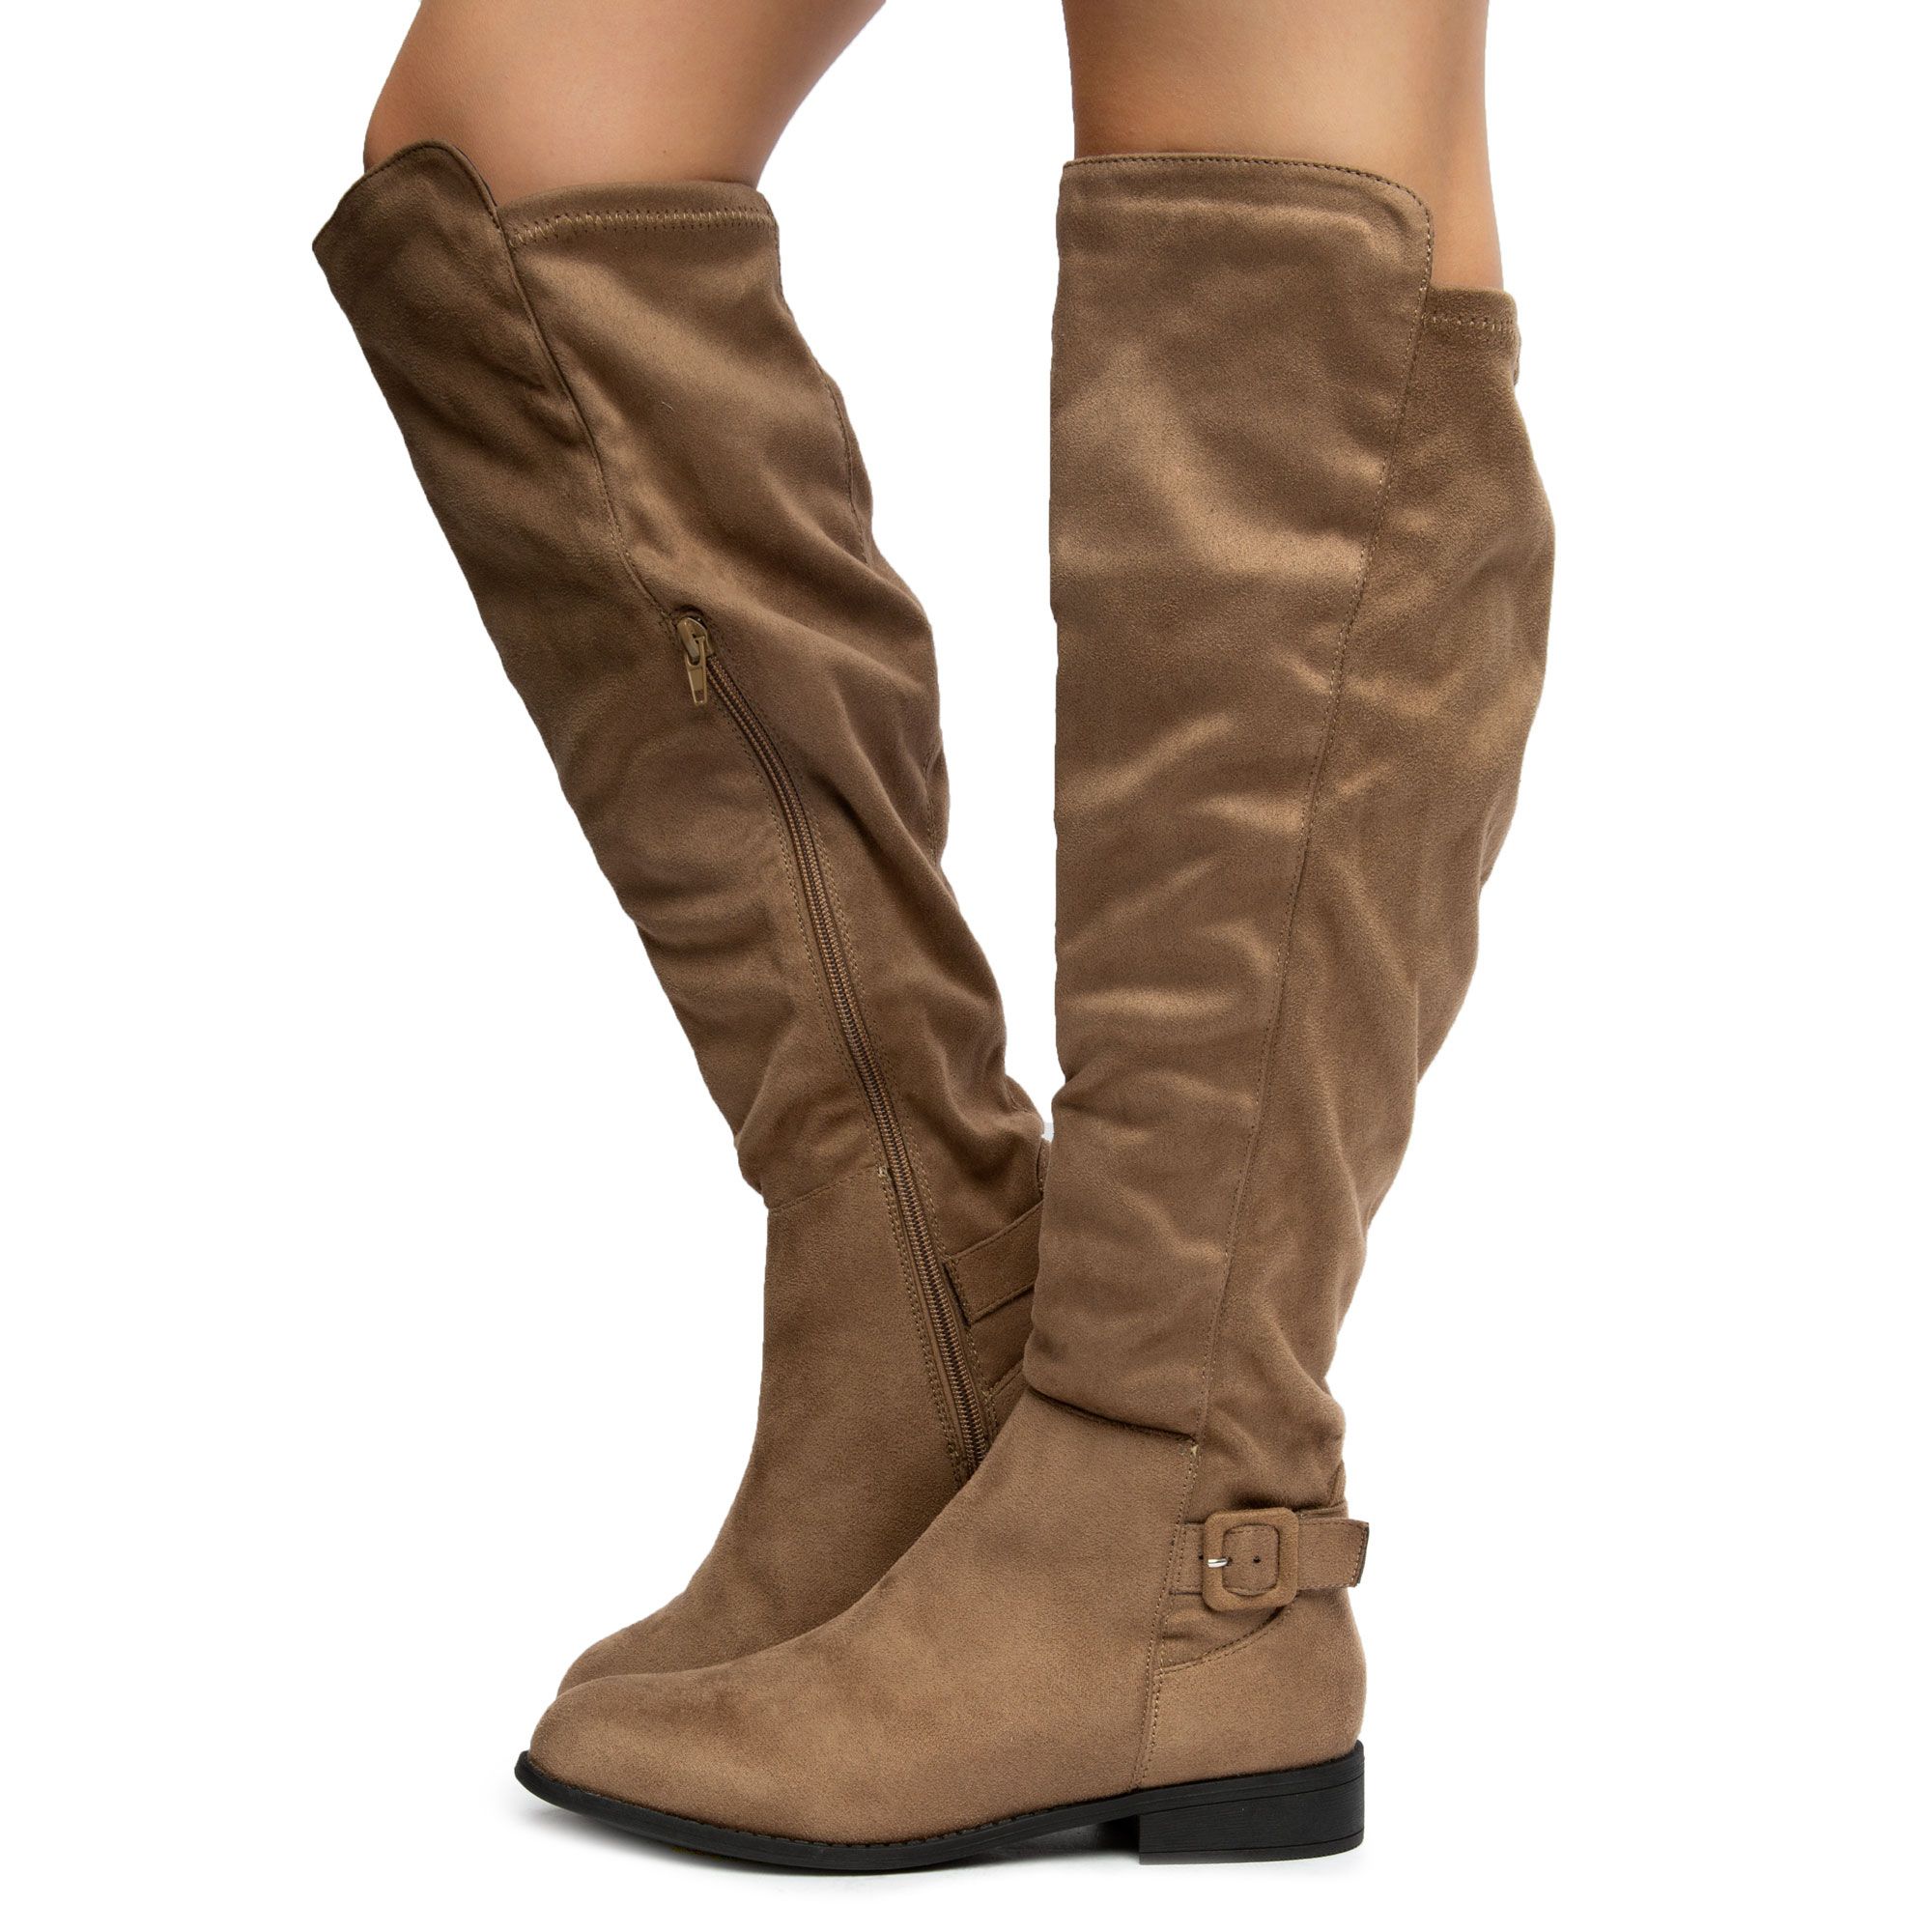 taupe suede boots knee high